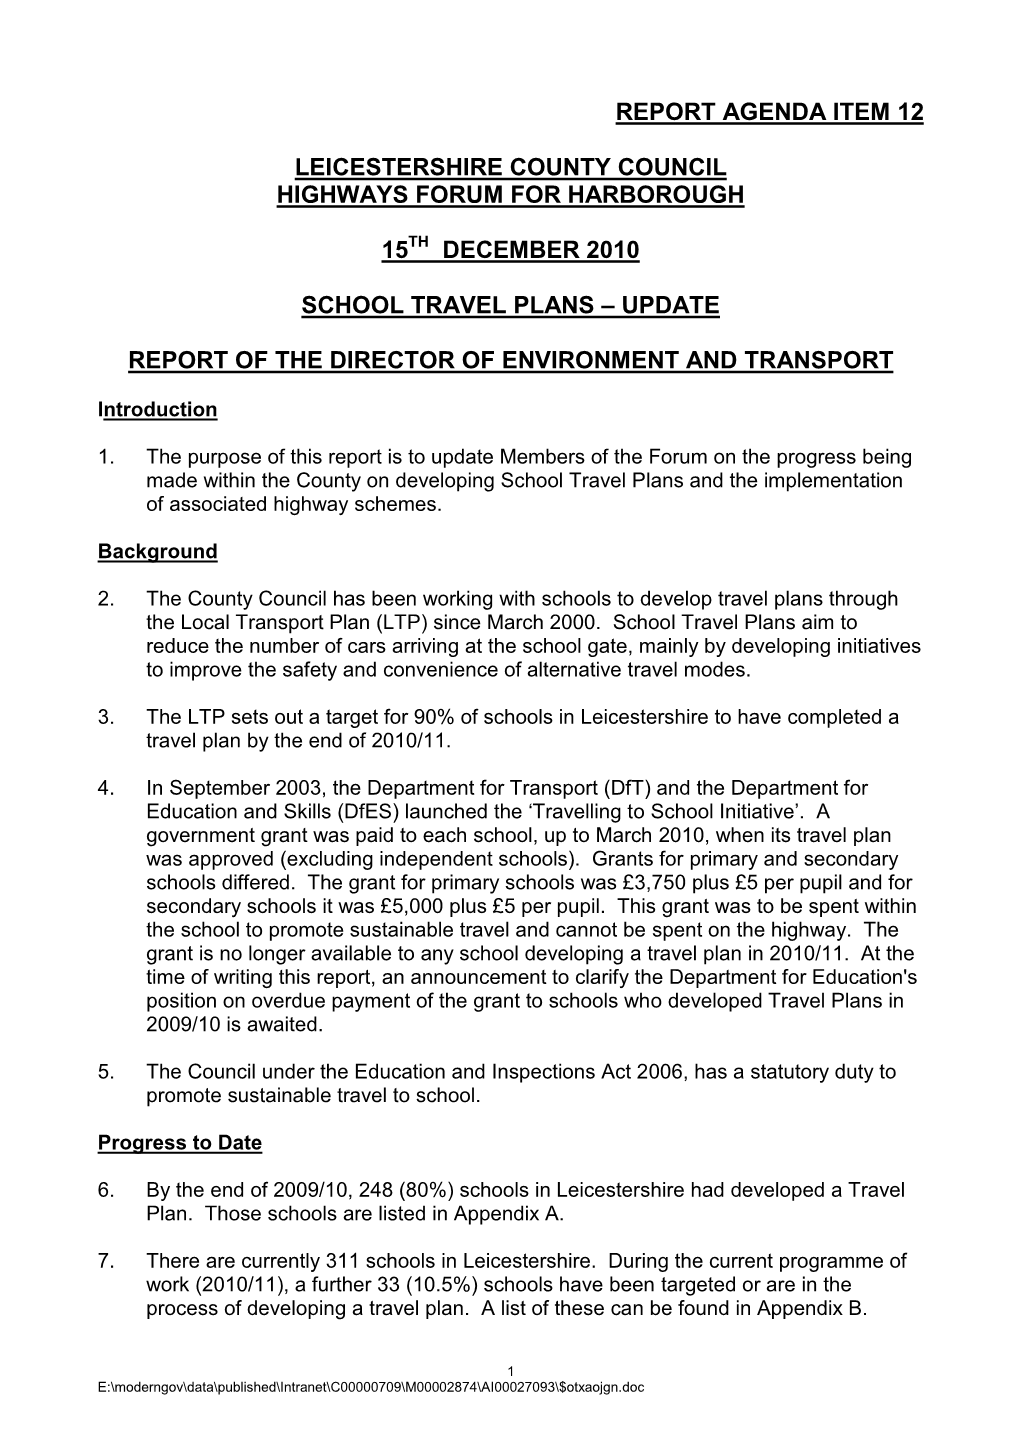 Report Agenda Item 12 Leicestershire County